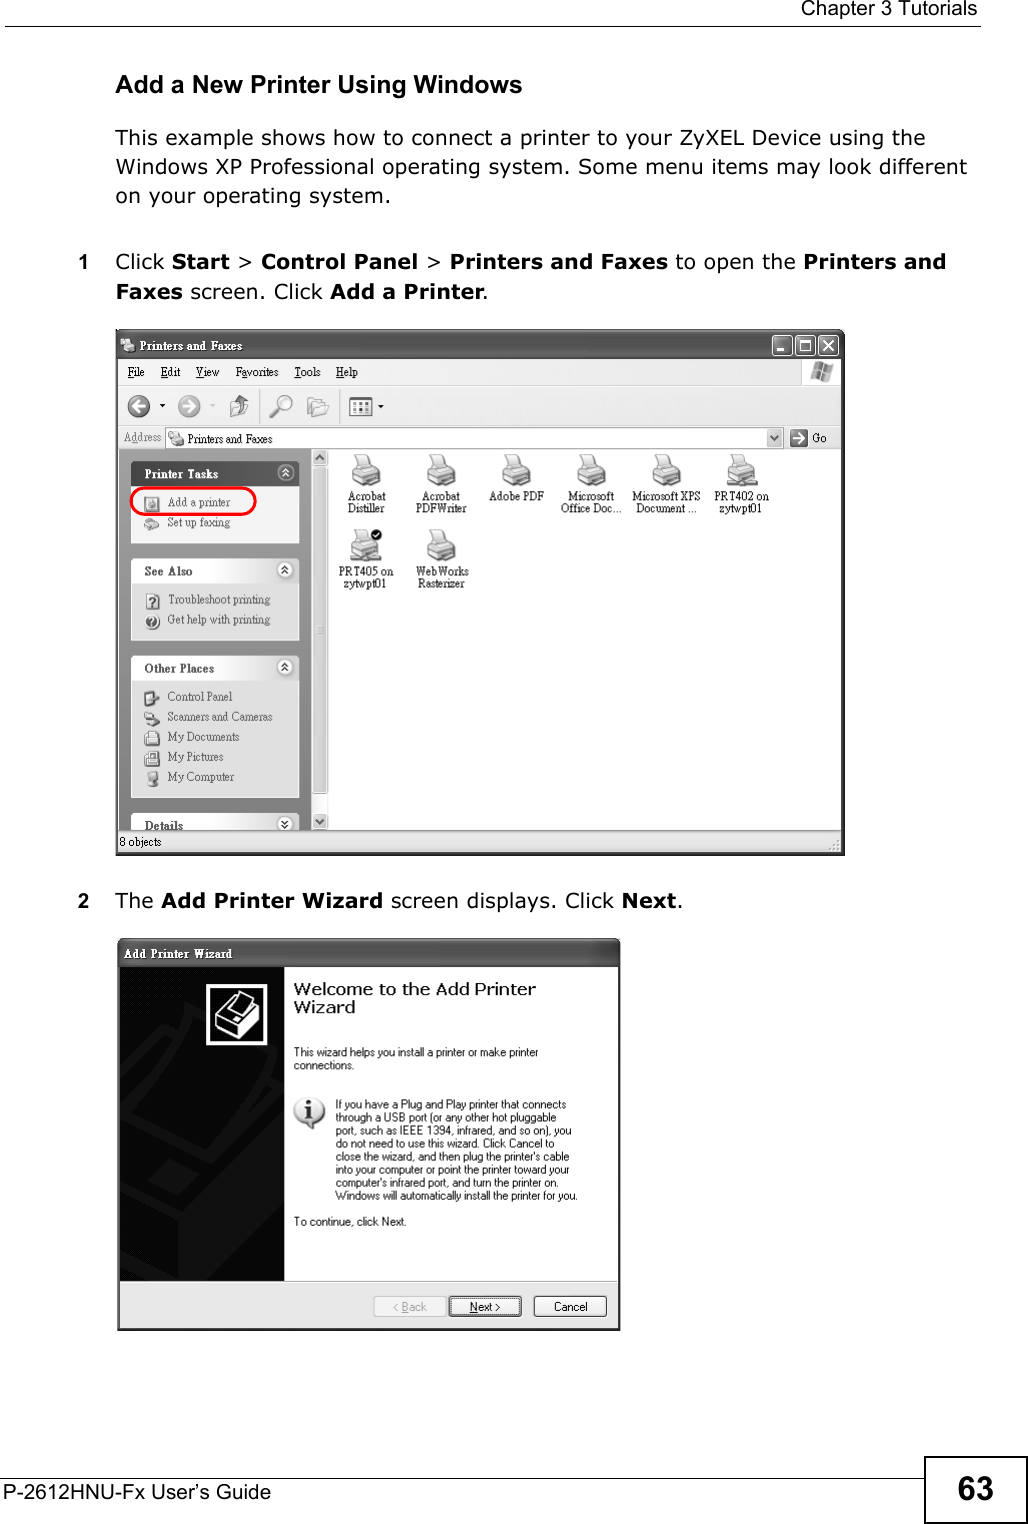  Chapter 3 TutorialsP-2612HNU-Fx User’s Guide 63Add a New Printer Using WindowsThis example shows how to connect a printer to your ZyXEL Device using the Windows XP Professional operating system. Some menu items may look different on your operating system.1Click Start &gt; Control Panel &gt;Printers and Faxes to open the Printers and Faxes screen. Click Add a Printer. Tutorial: Printers Folder2The Add Printer Wizard screen displays. Click Next.Tutorial: Add Printer Wizard: Welcome